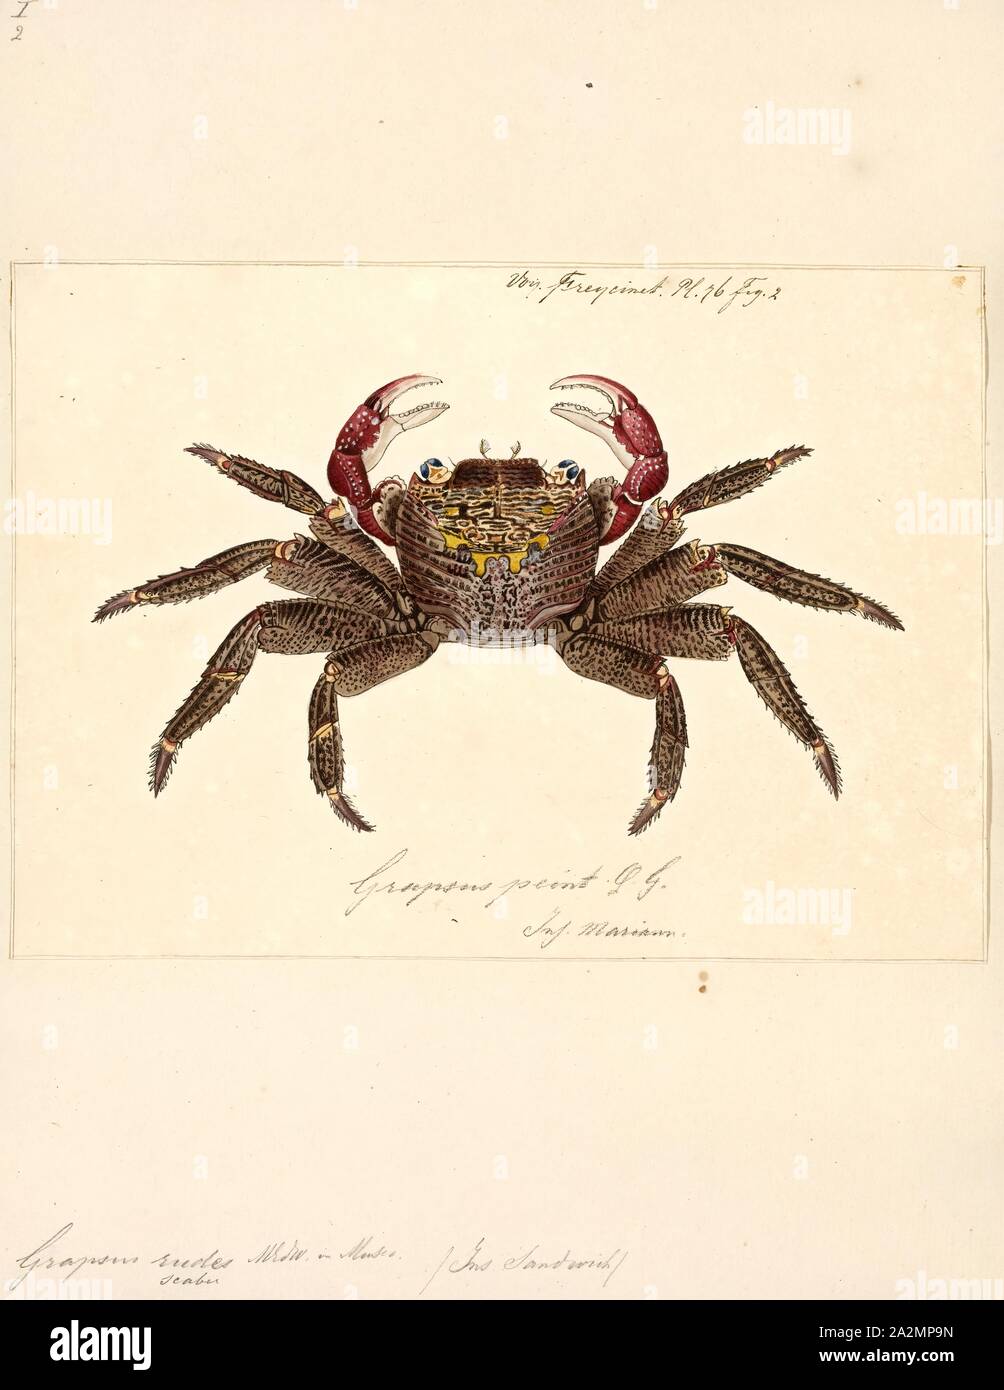 Grapsus rudes, Print, Grapsus is a genus of lightfoot crabs, comprising the following species:'Grapsus' is a New Latin modification of Greek 'grapsaios' meaning 'crab Stock Photo